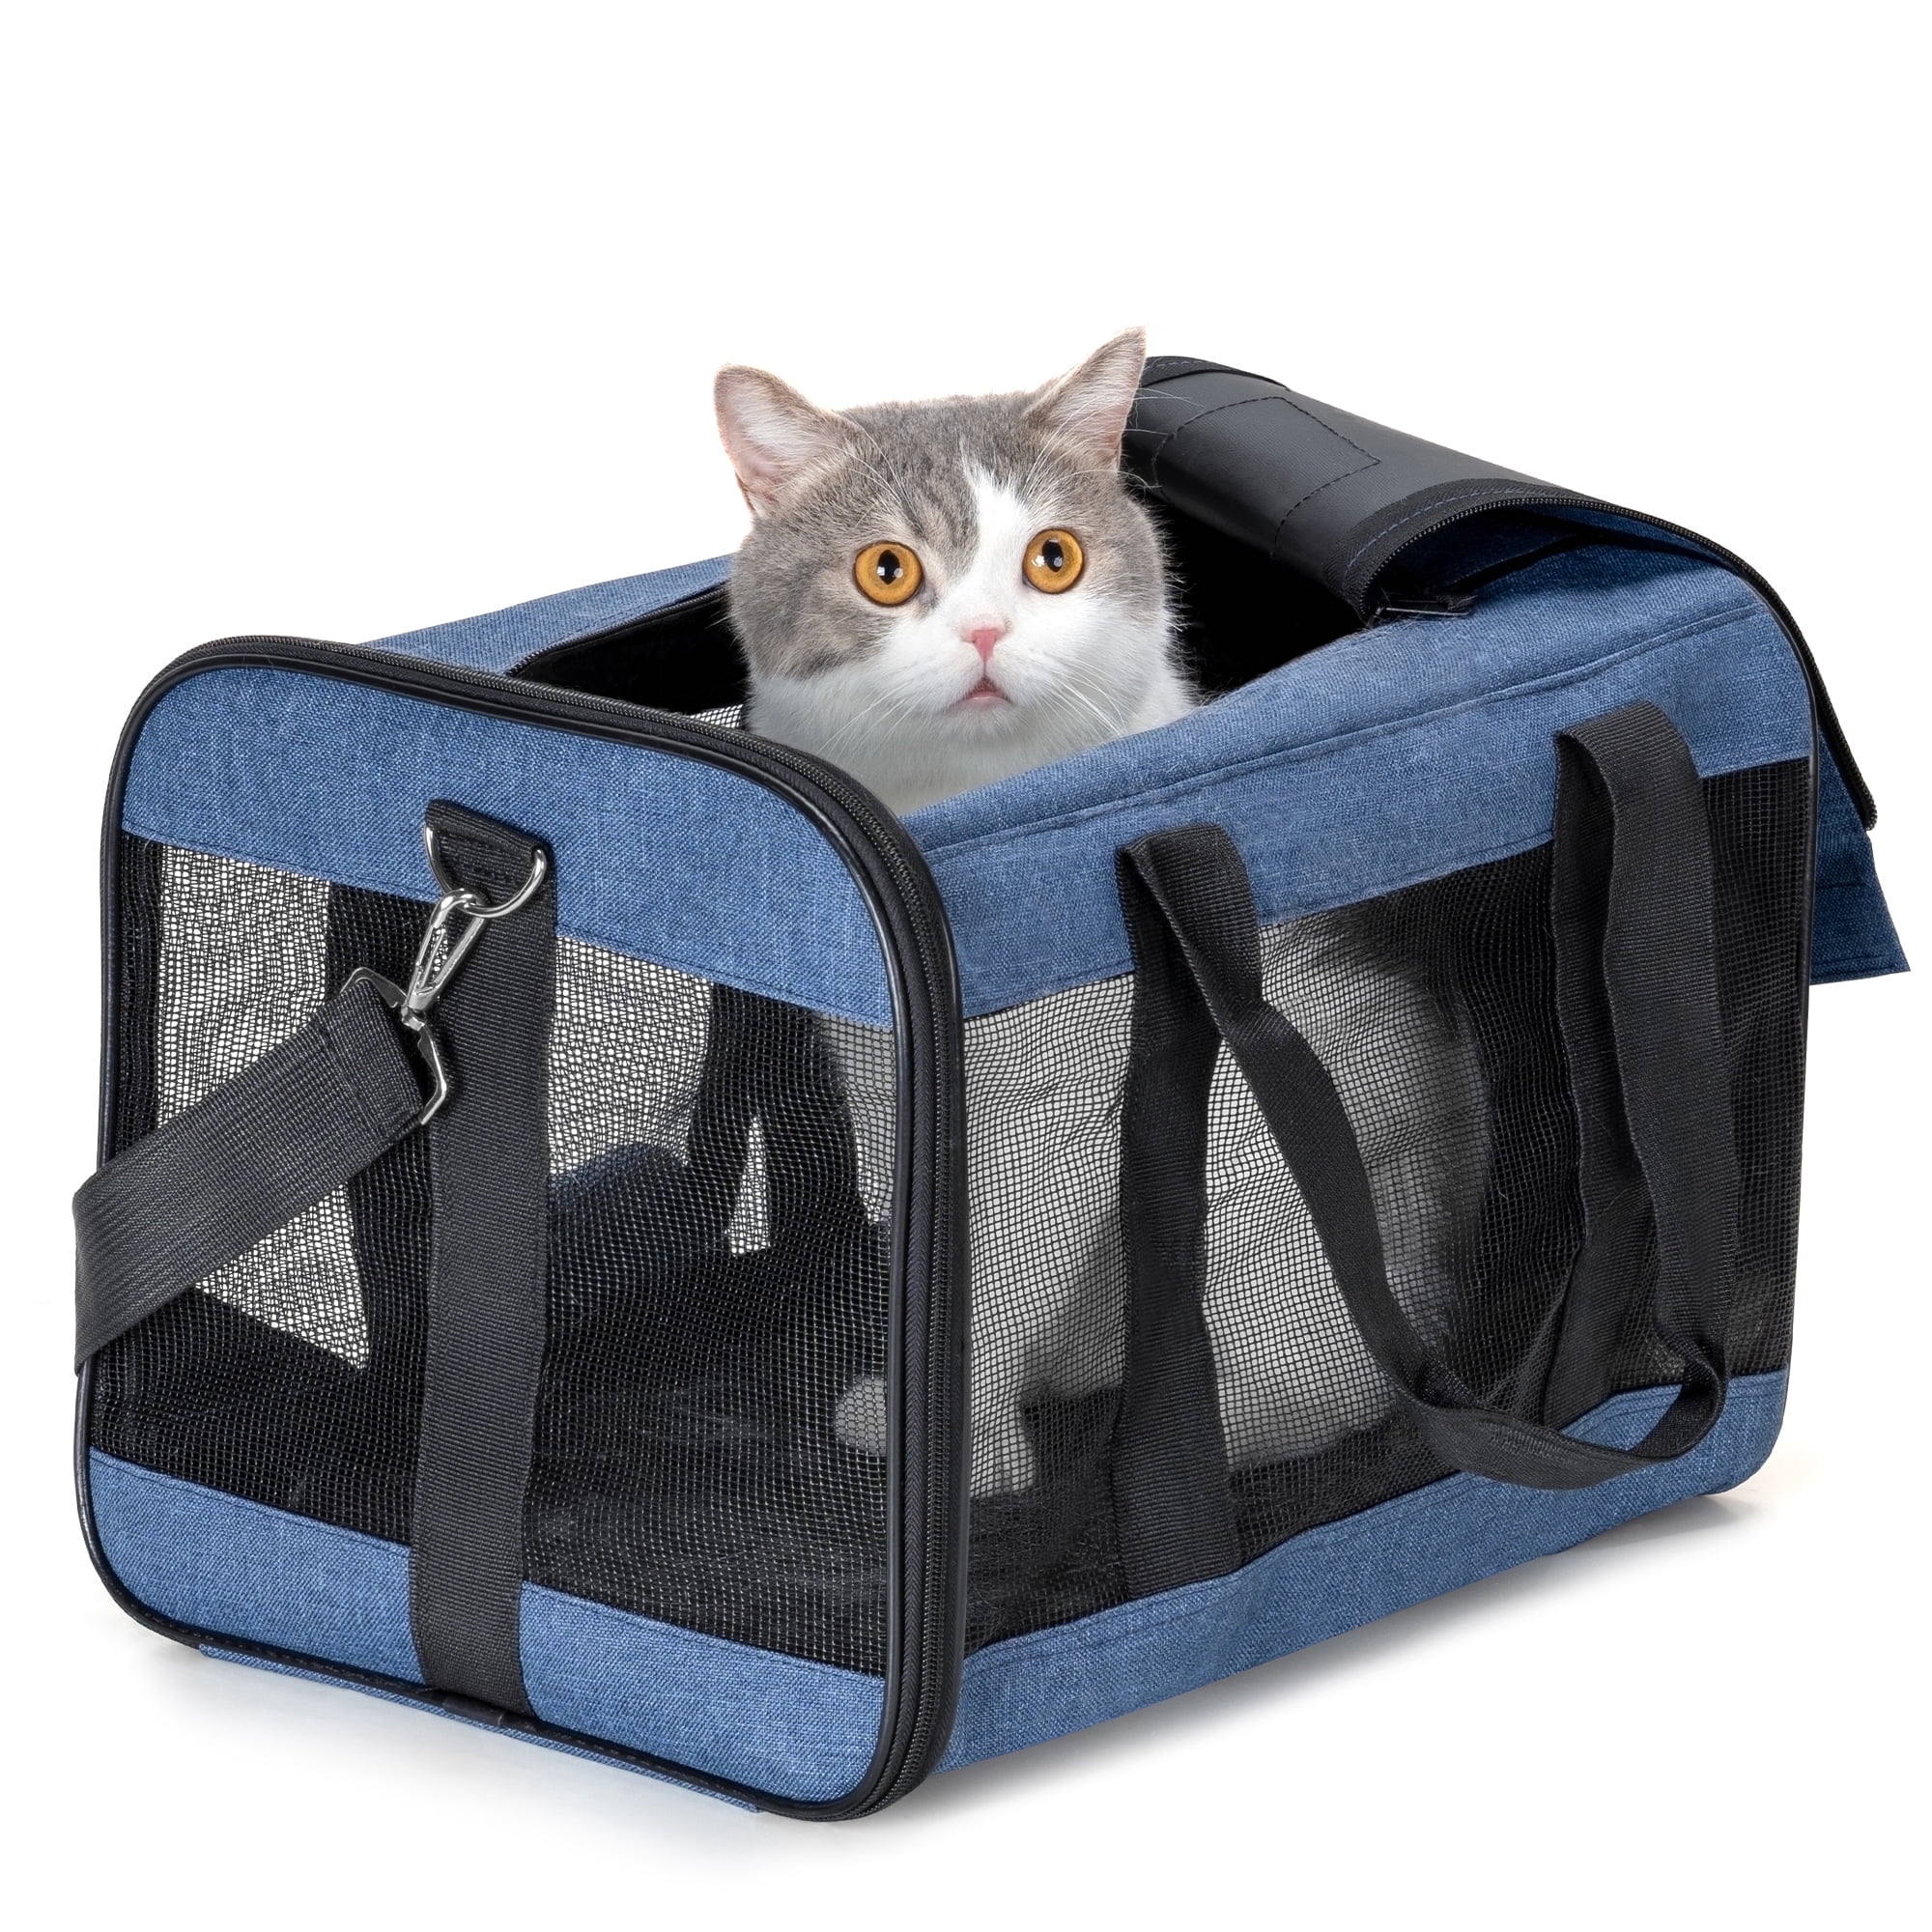 Conlun Airline Approved Pet Carrier-Foldable,Soft-Sided, Safety  Leash,Comfort for Traveling with Small to Medium-Sized Pets,Blue